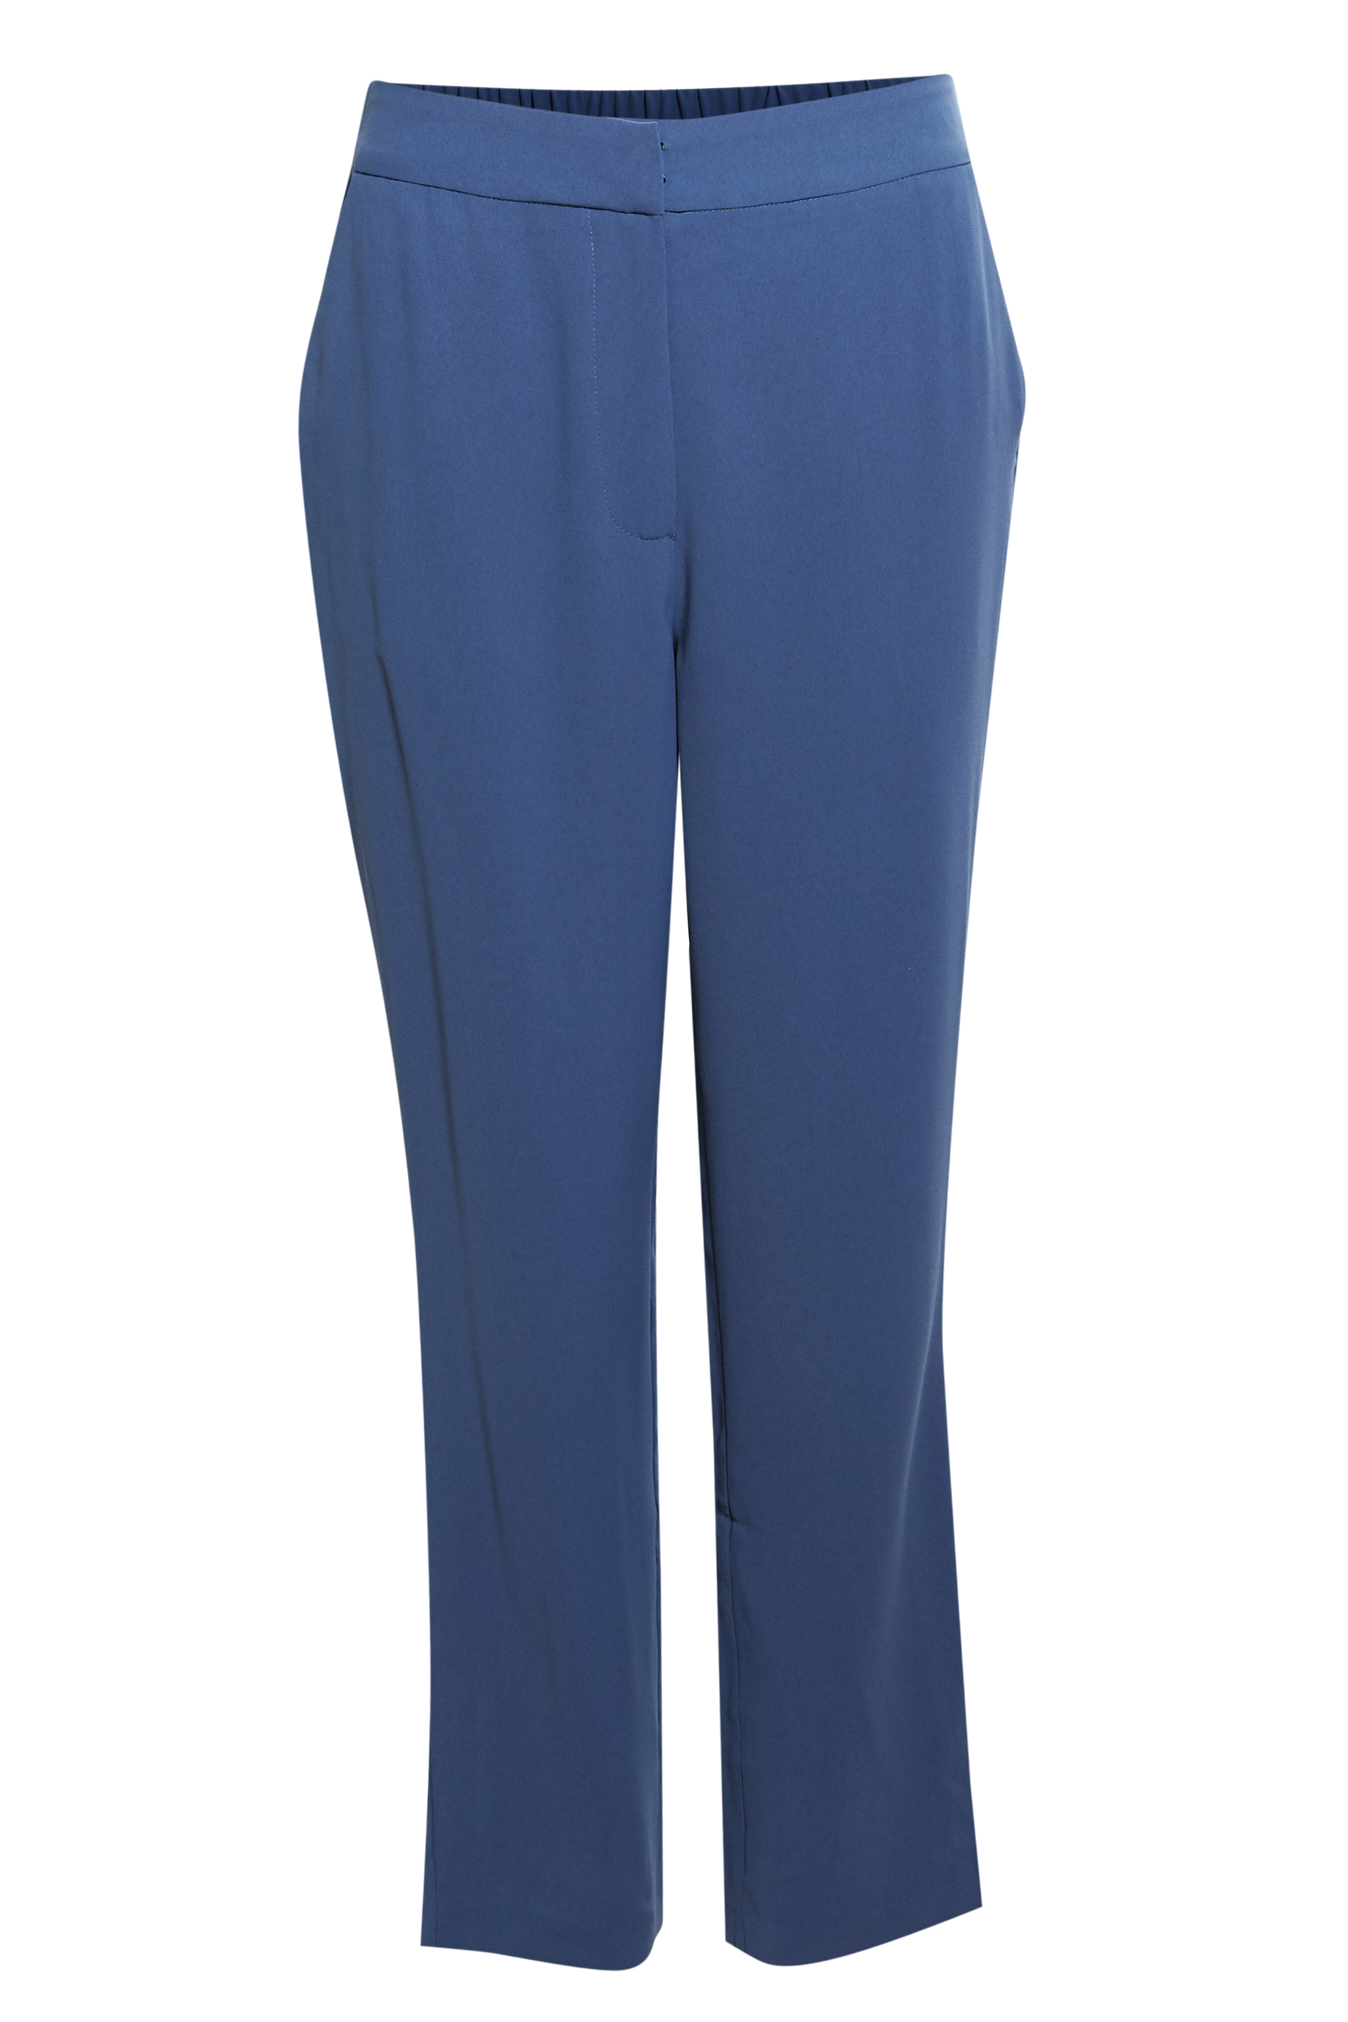 Skies Are Blue Tailored Pant